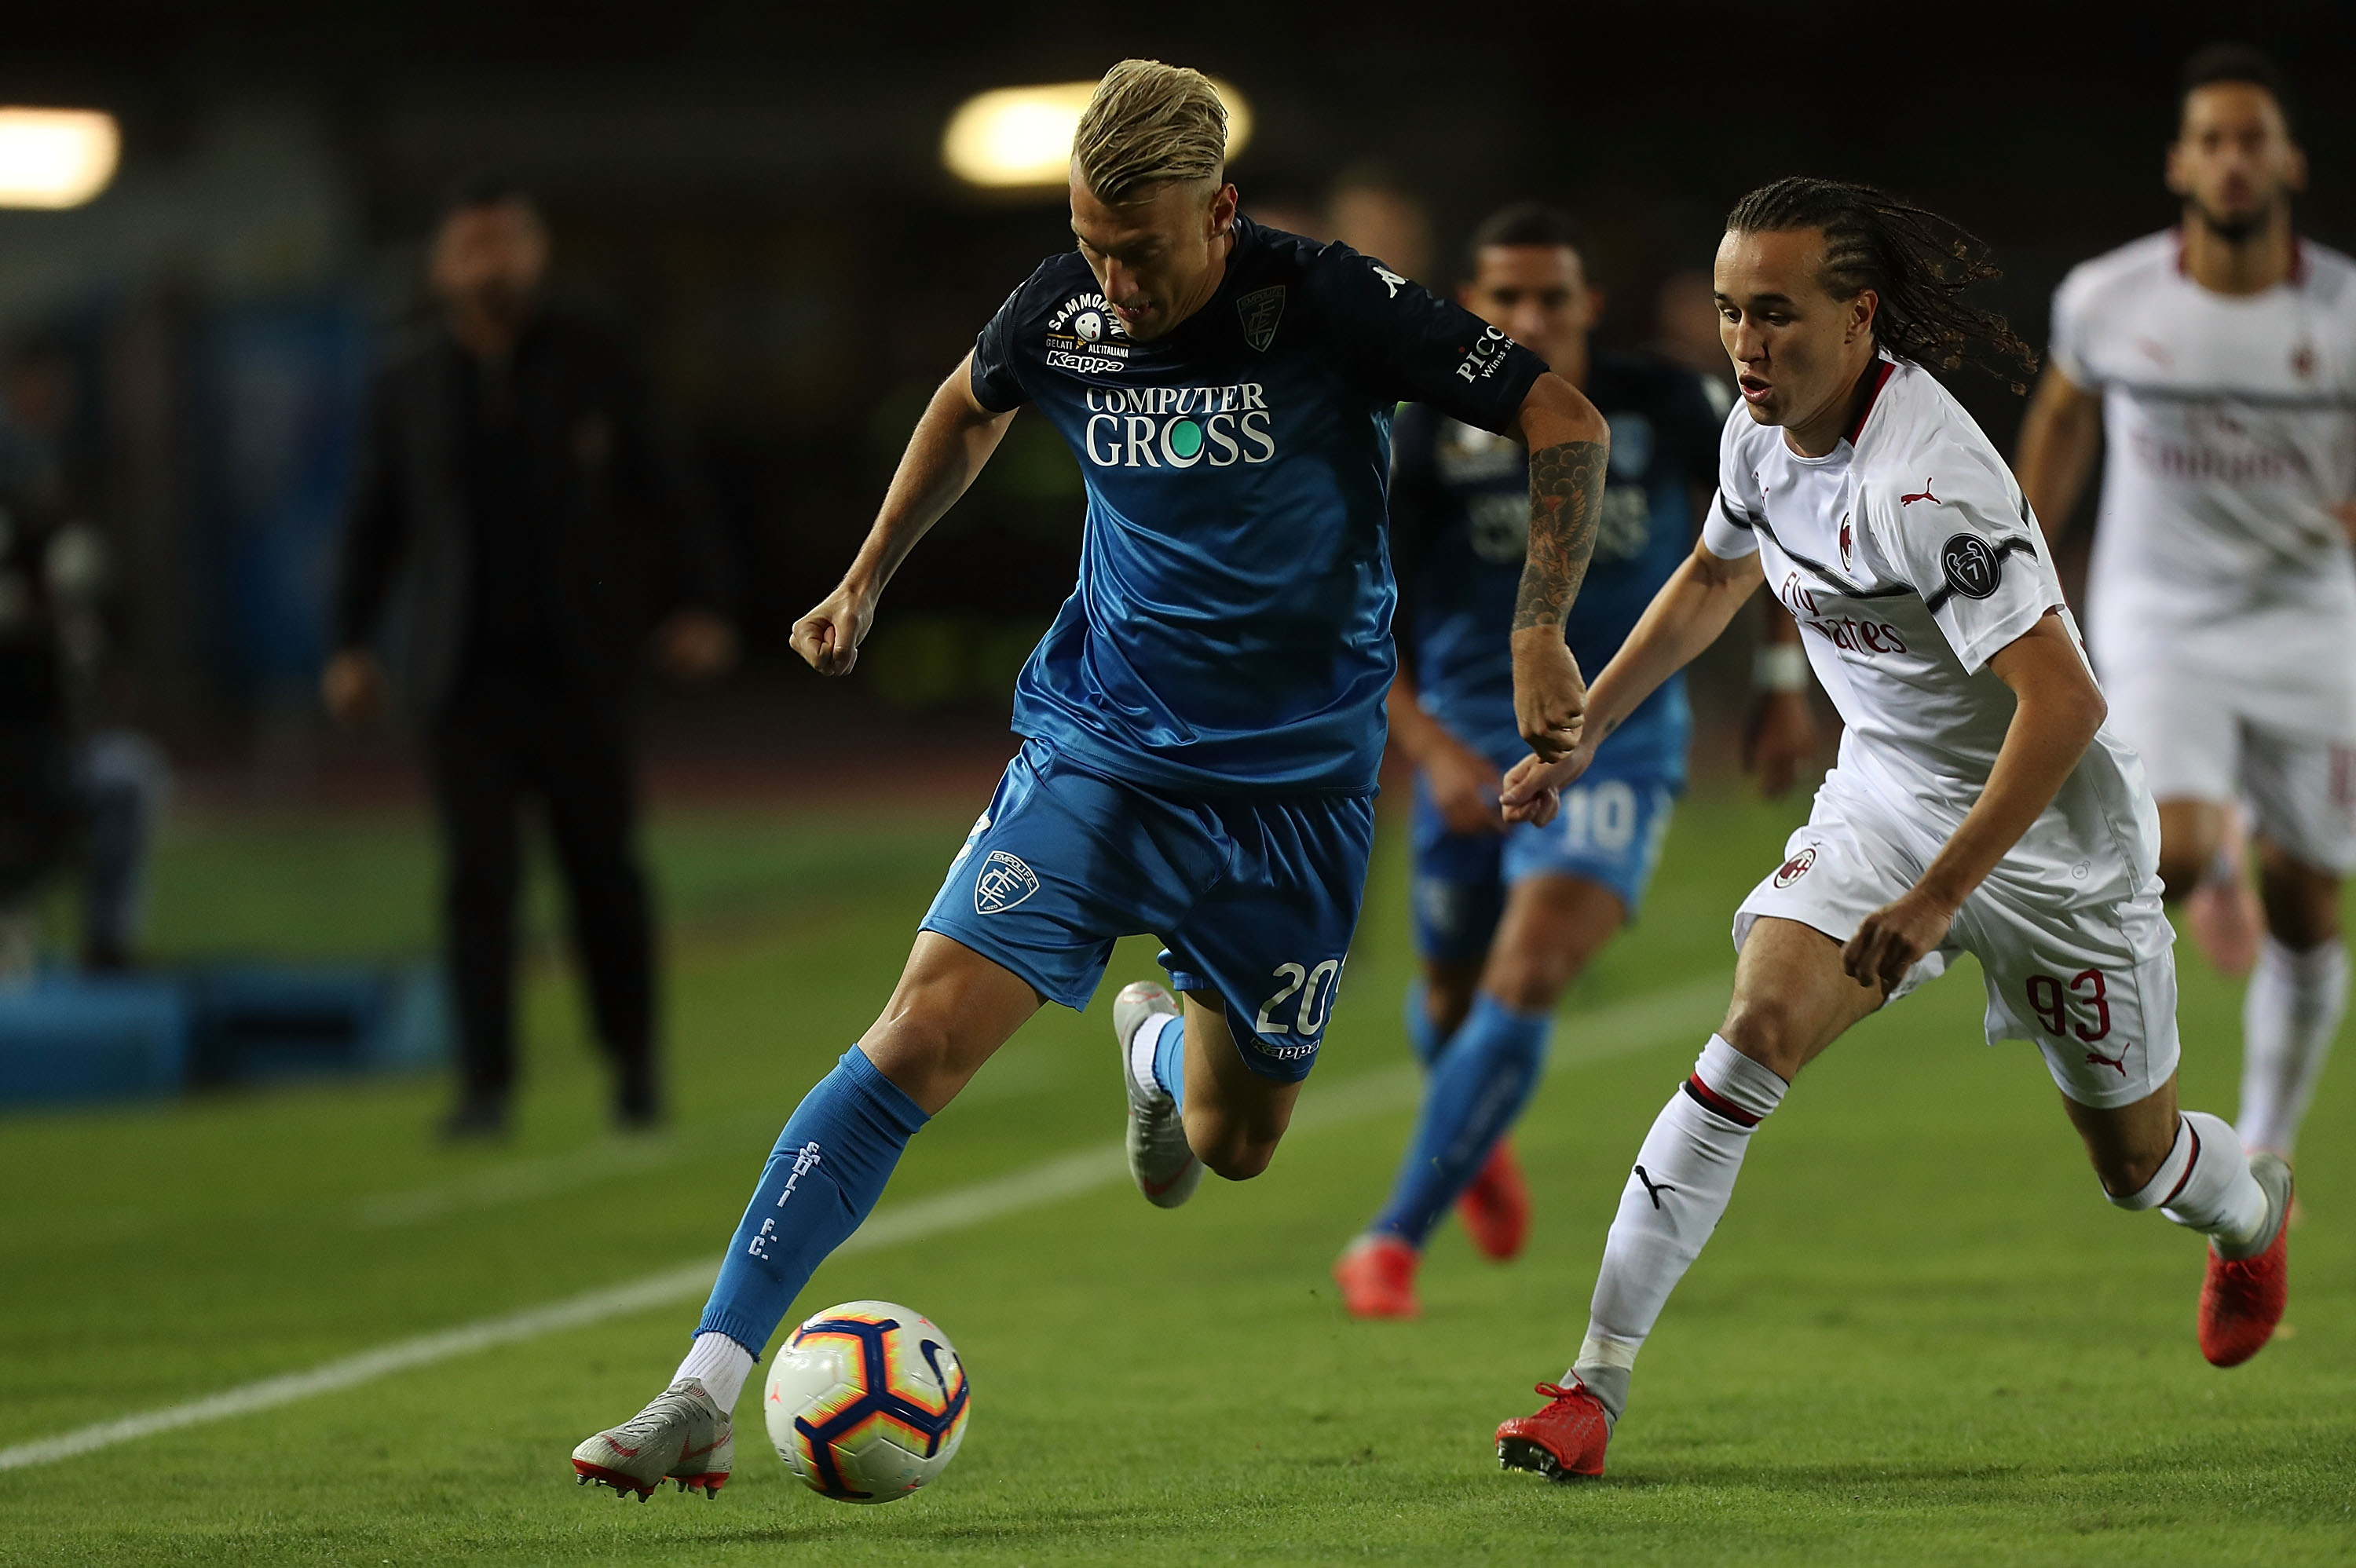 EMPOLI, ITALY - SEPTEMBER 27: Giovanni Di Lorenzo of Empoli FC in actio against Diego Laxalt of AC Milkan during the serie A match between Empoli and AC Milan at Stadio Carlo Castellani on September 27, 2018 in Empoli, Italy. (Photo by Gabriele Maltinti/Getty Images)